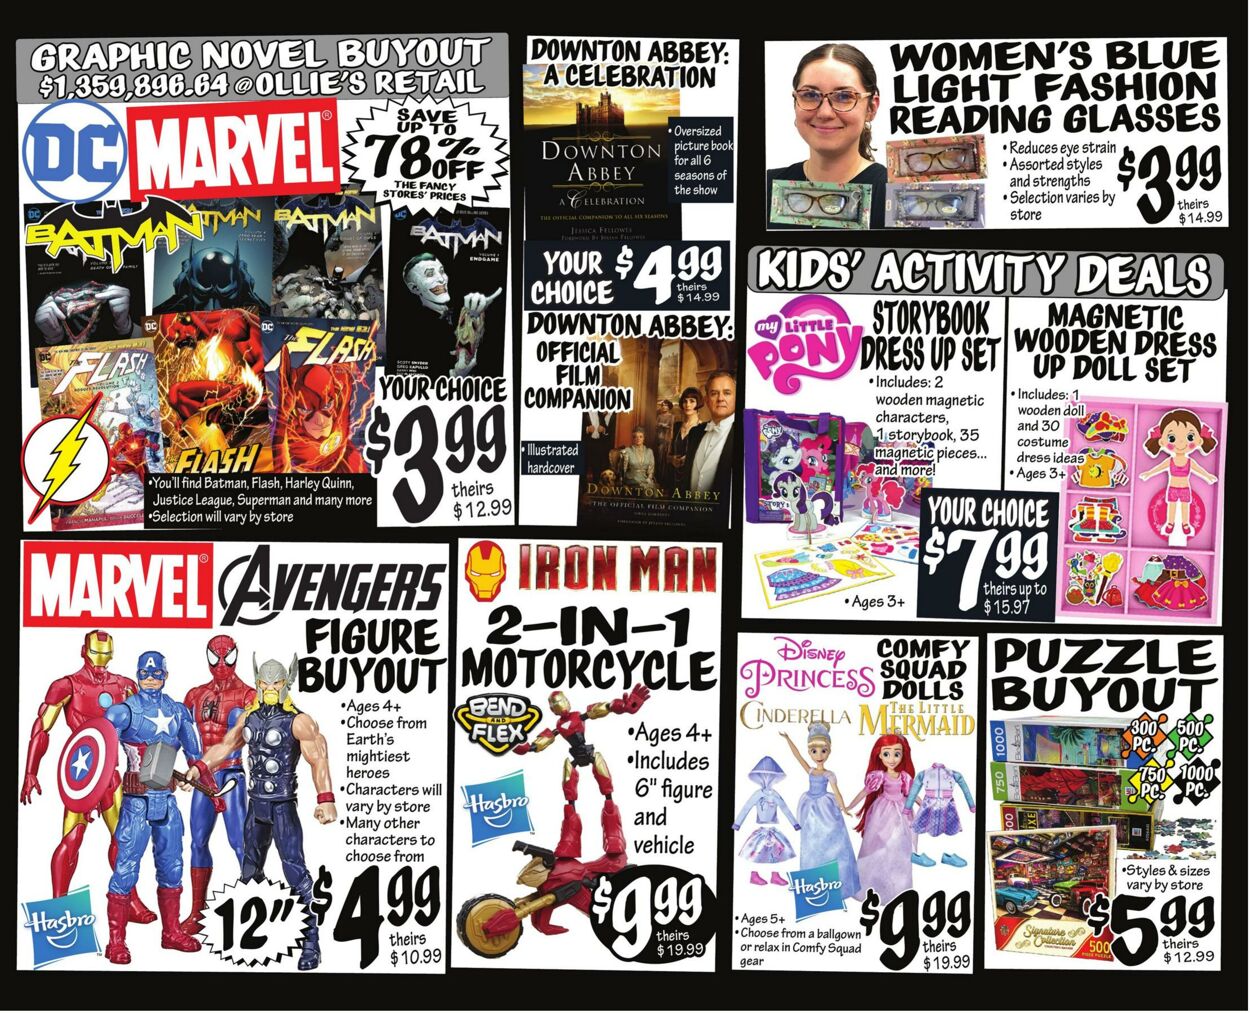 Weekly ad Ollie's 08/31/2022 - 09/06/2022